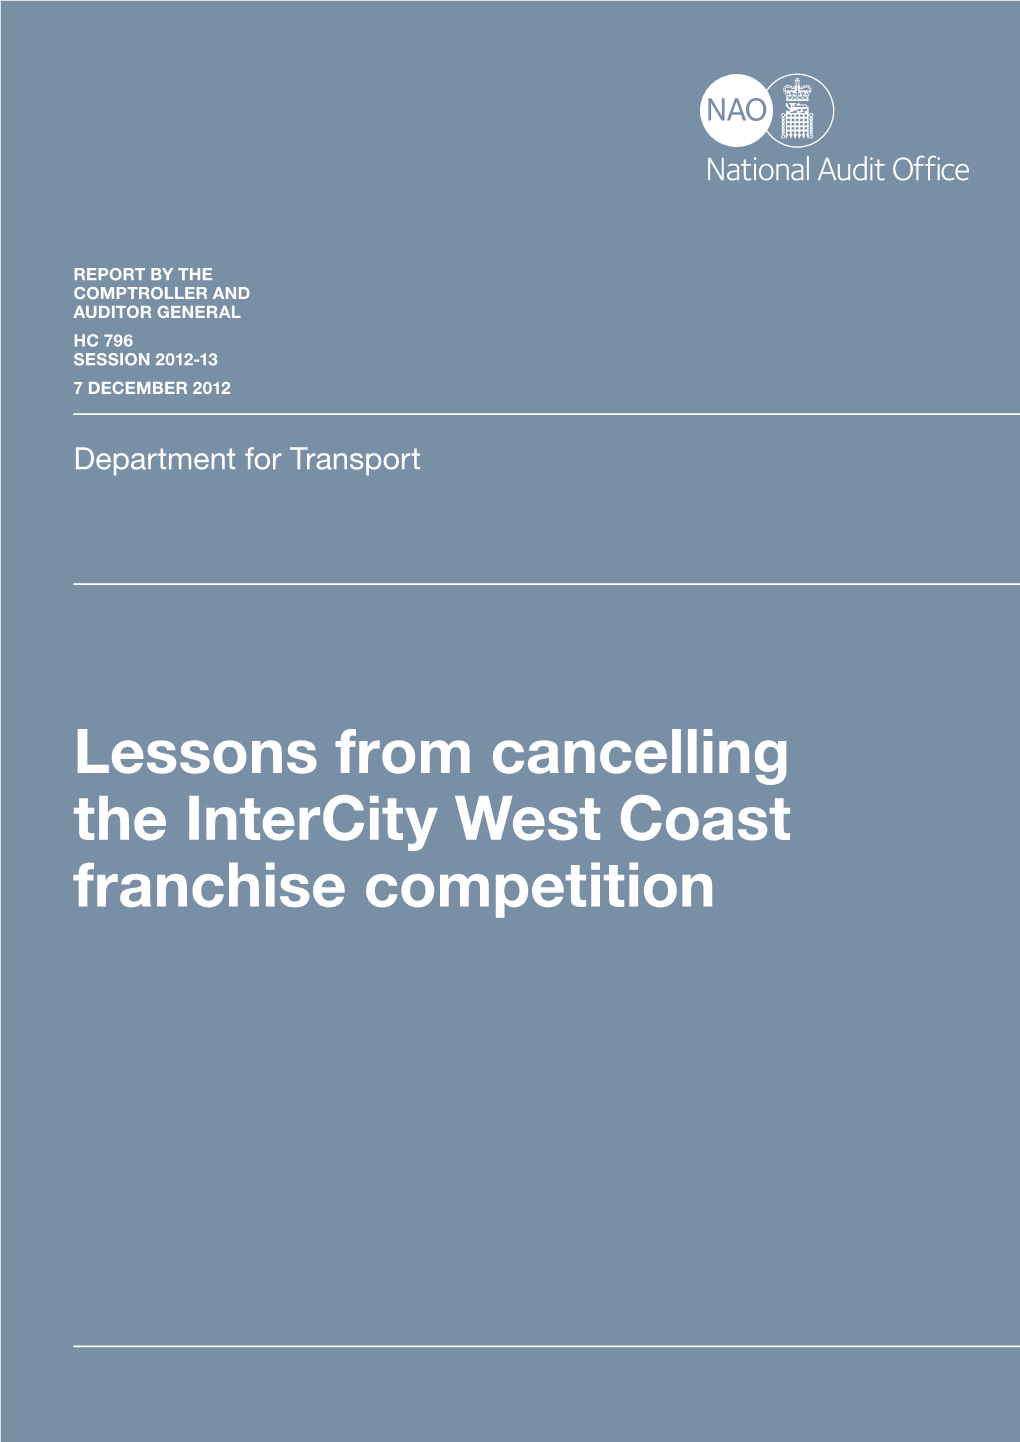 Lessons from Cancelling the Intercity West Coast Franchise Competition Our Vision Is to Help the Nation Spend Wisely